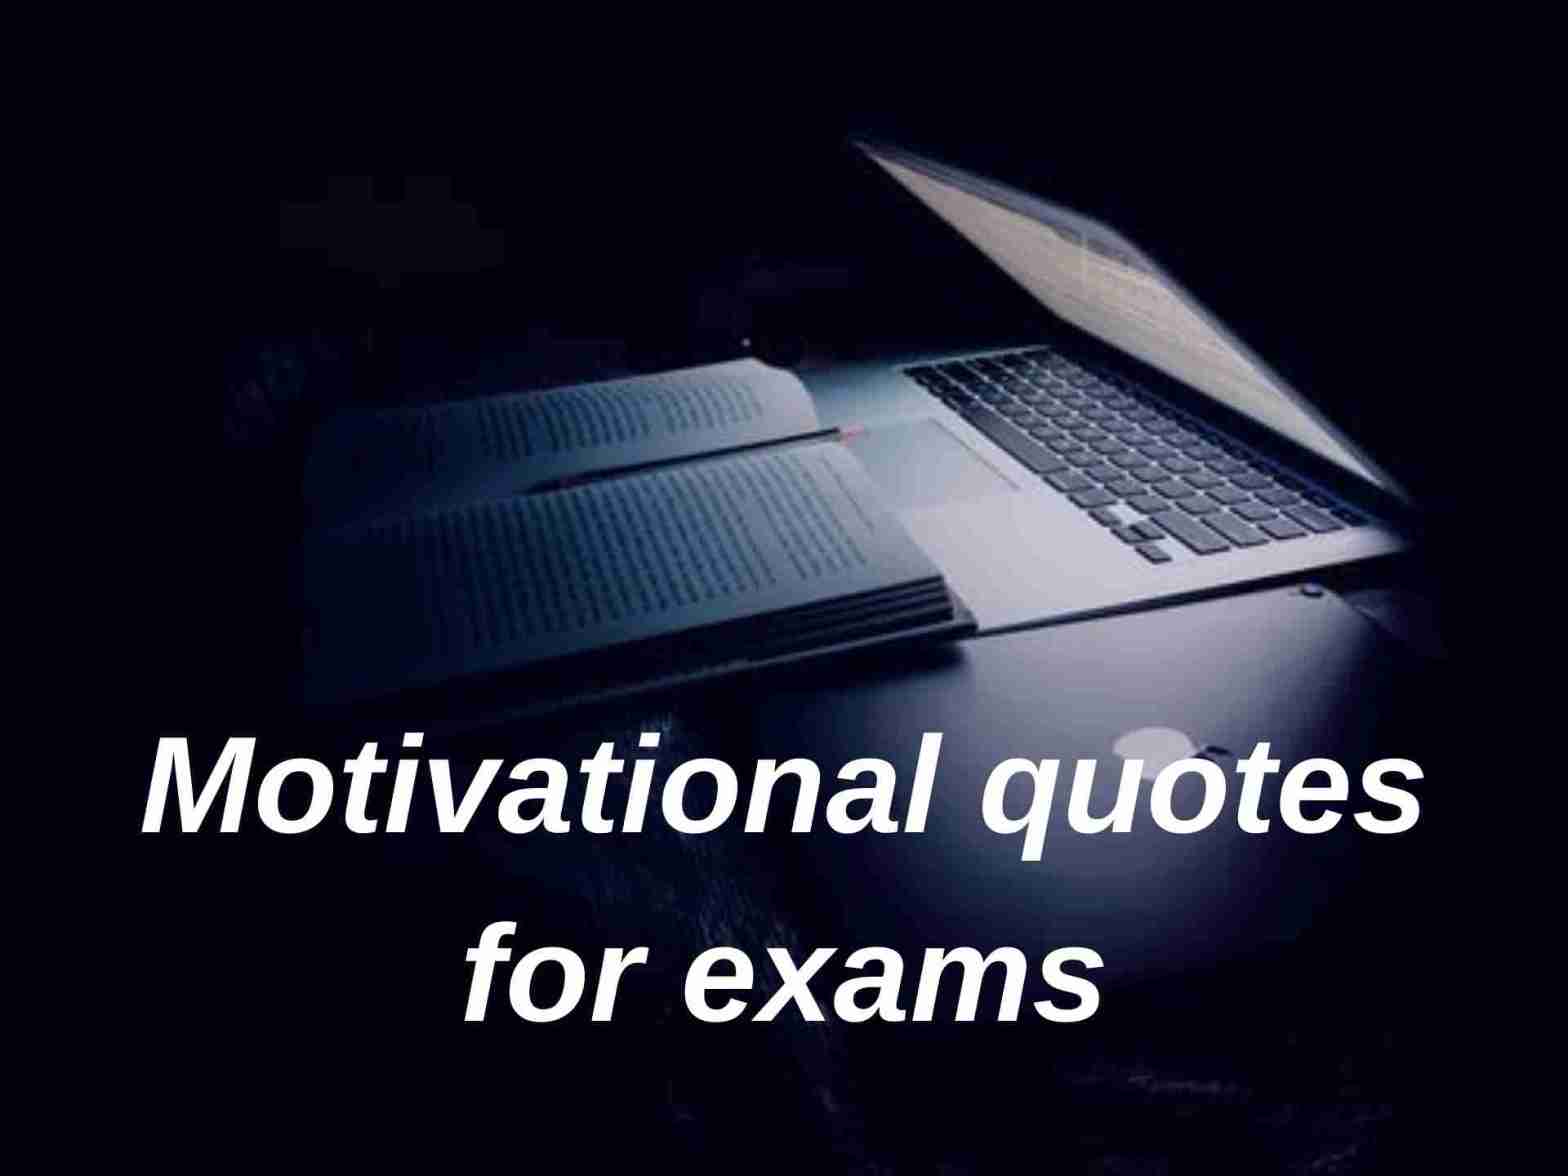 Motivational quotes for exams